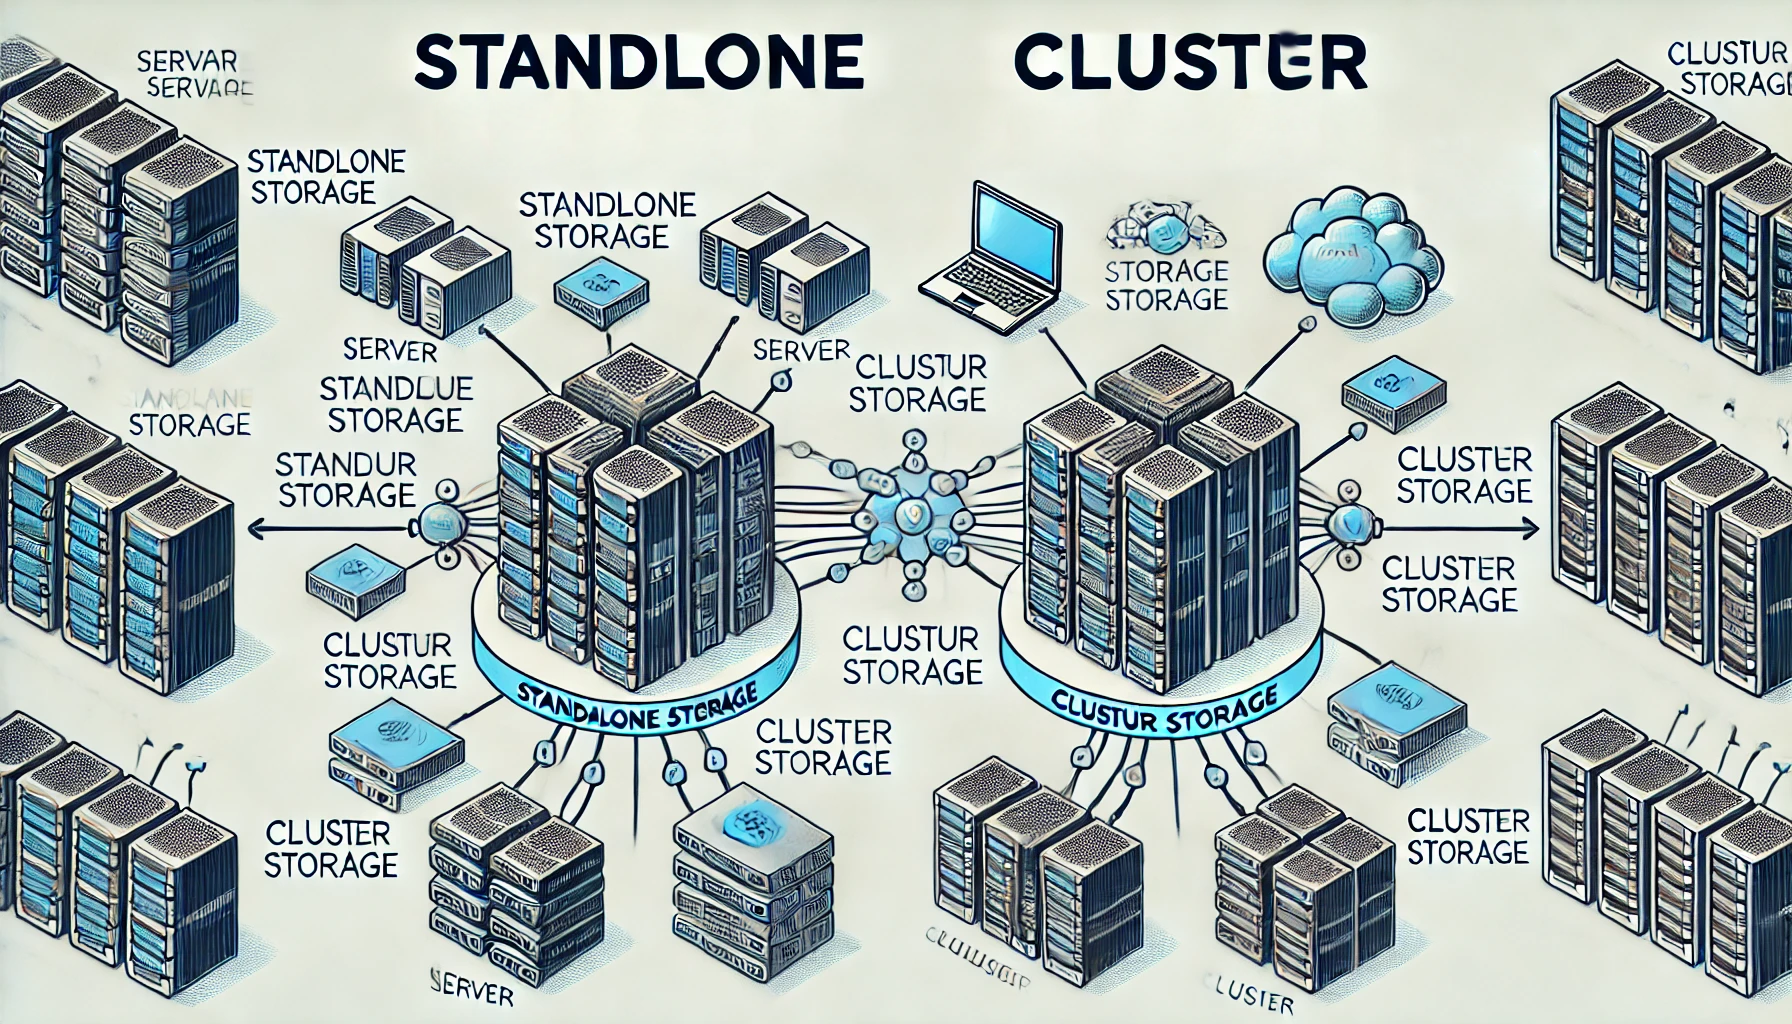 Standalone and Cluster storage options